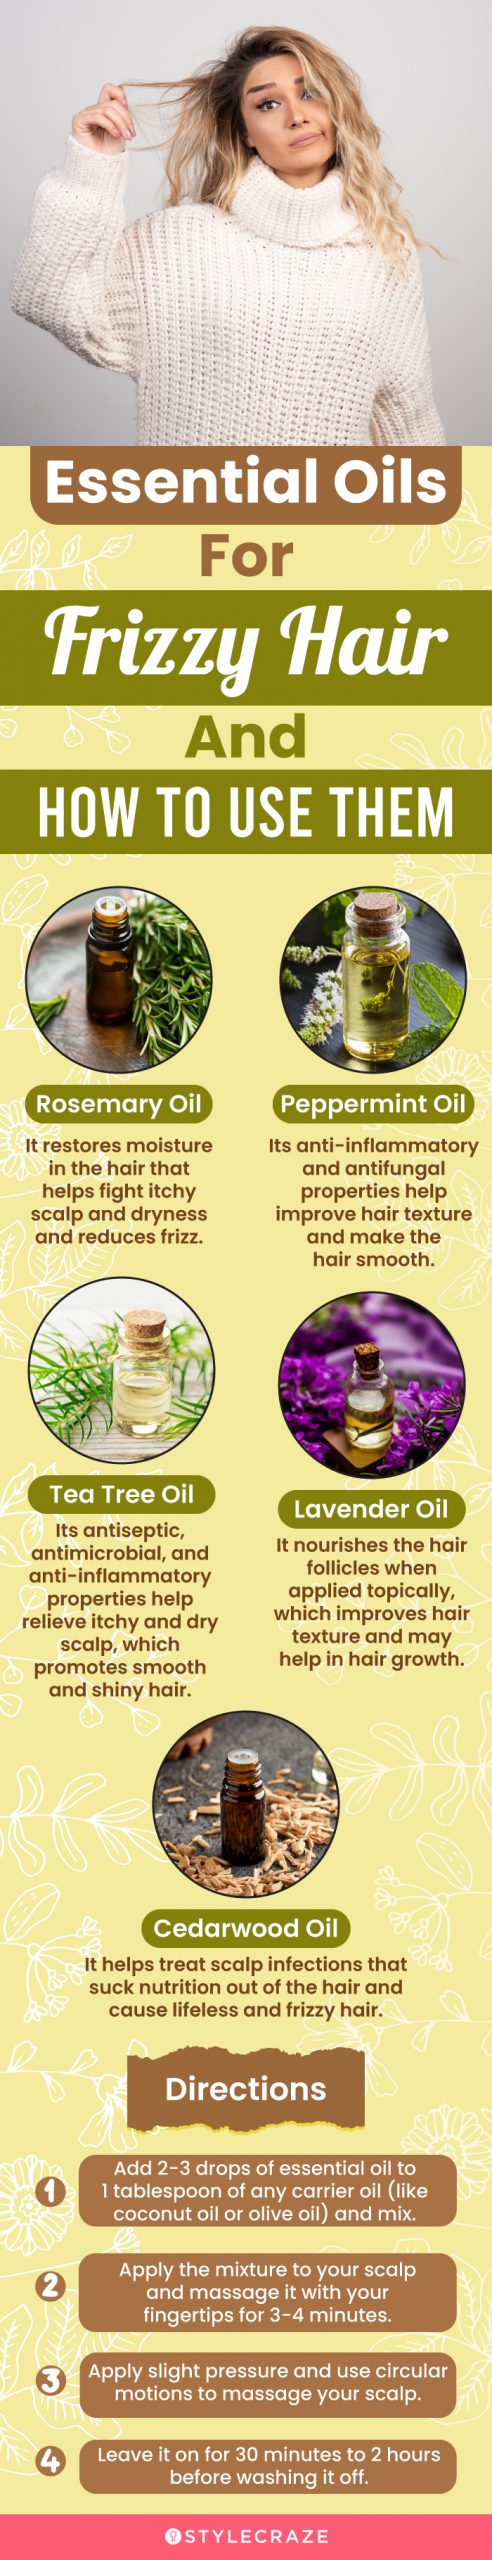 essential oils for frizzy hair and how to use them (infographic)